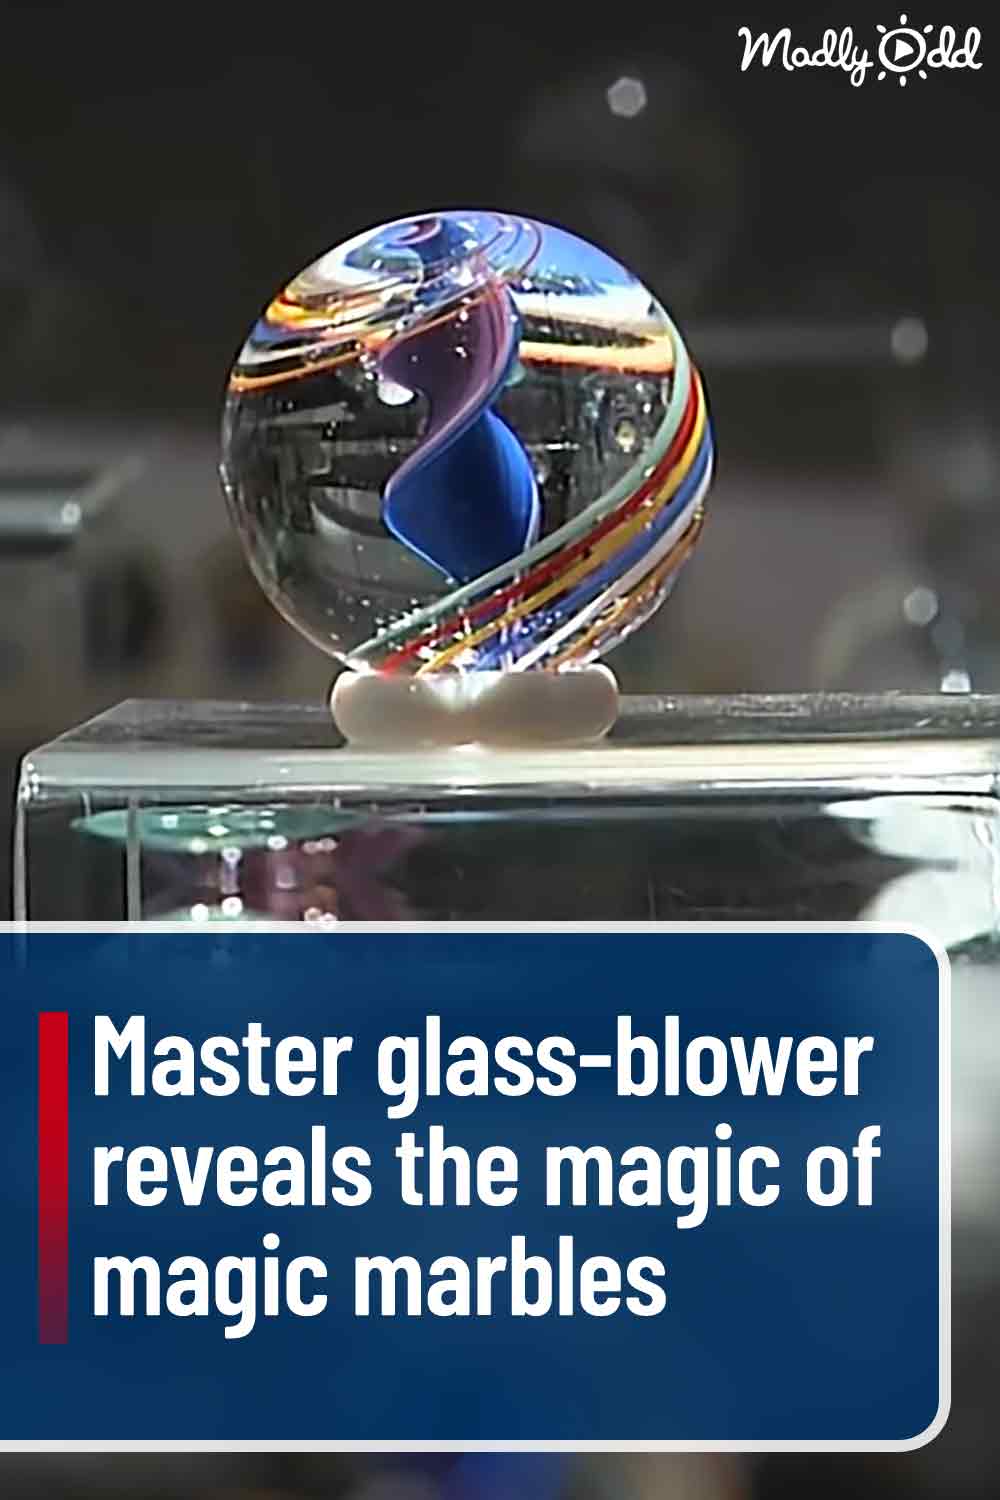 Master glass-blower reveals the magic of magic marbles